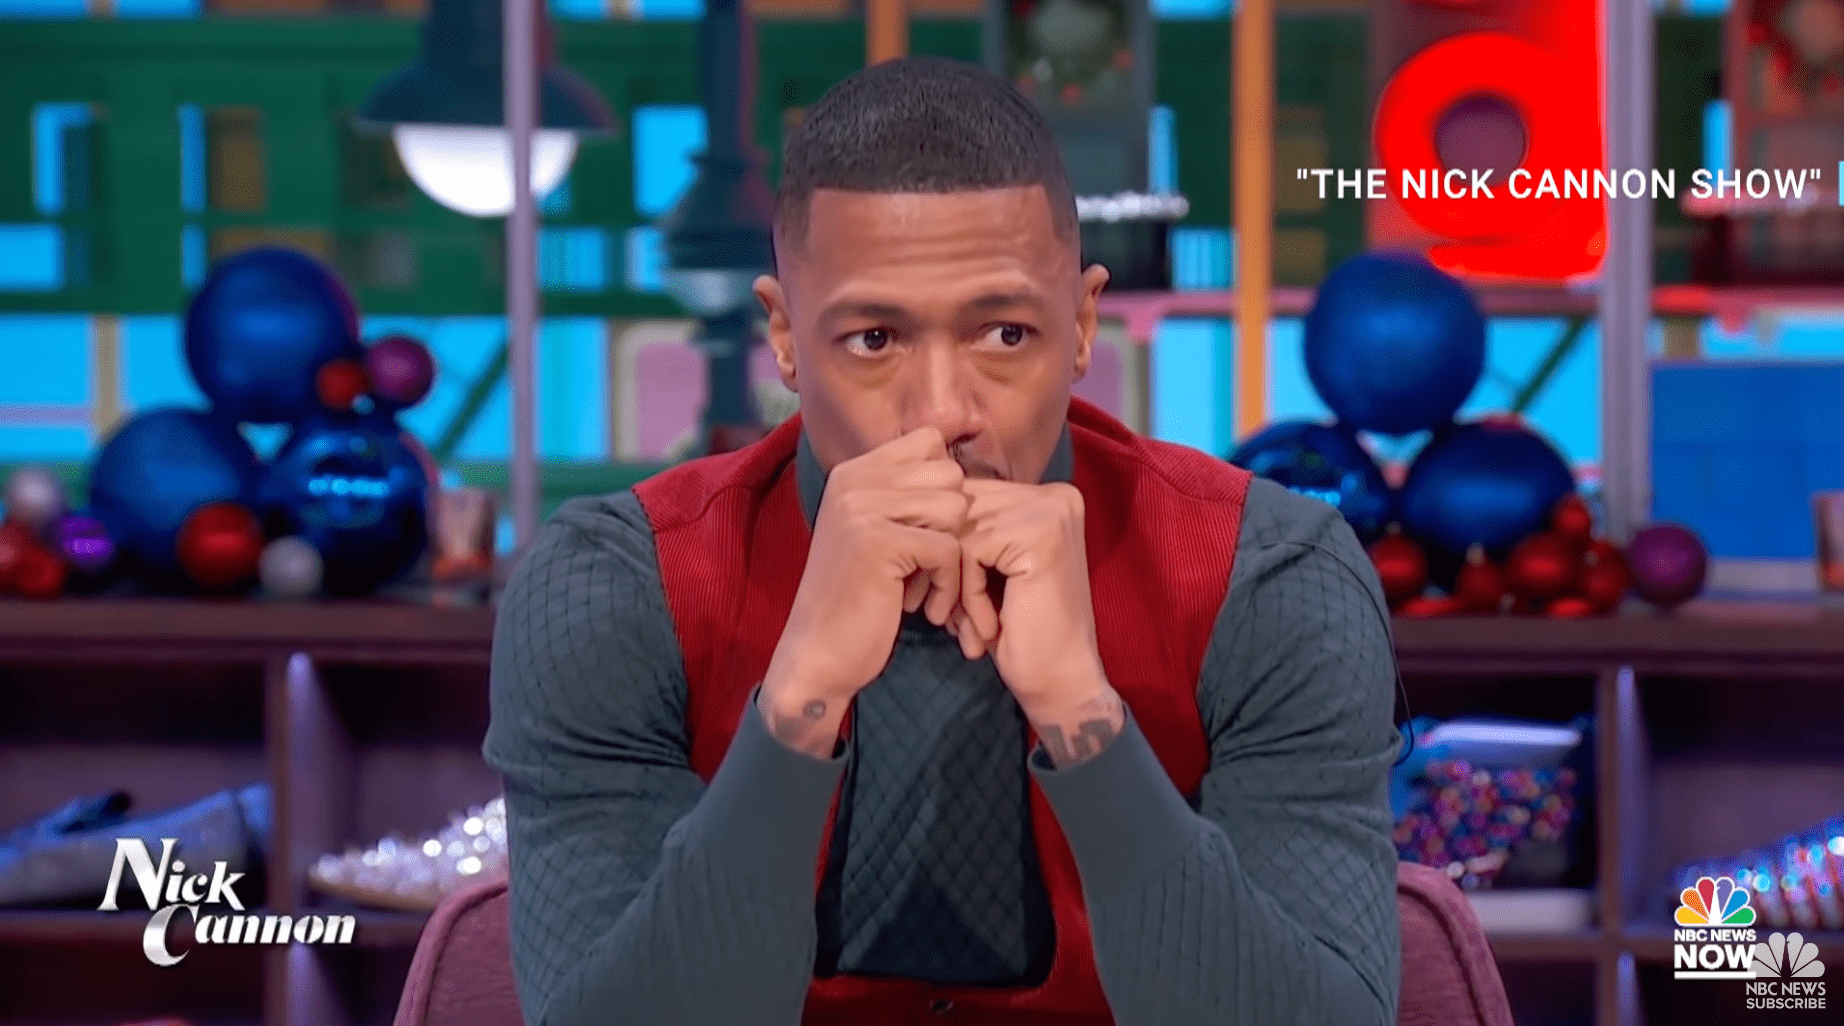 Nick talks about the death of his son, Zen, on his talk show "The Nick Cannon Show" | Source: YouTube.com/NBCNews